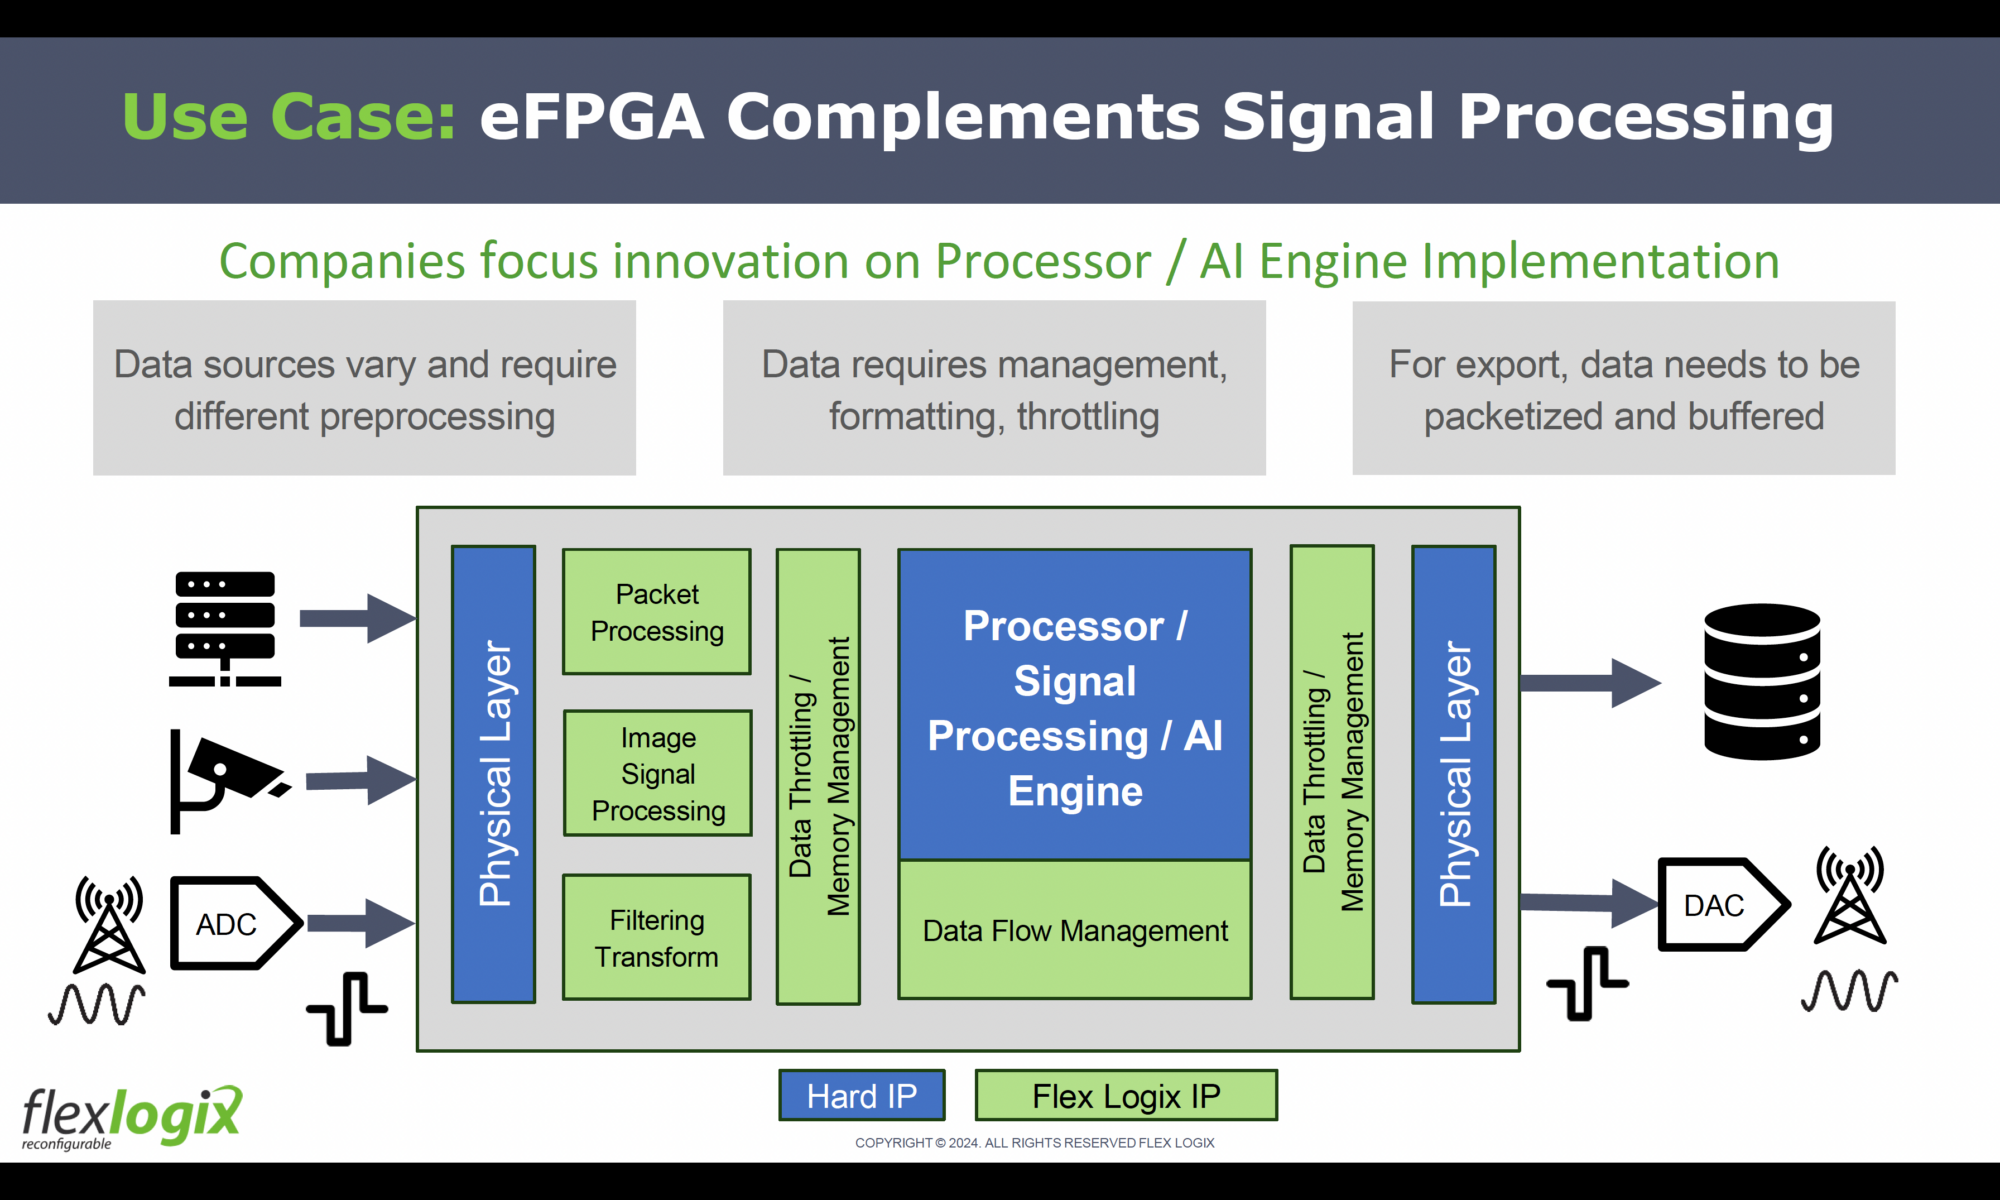 Use Case eFPGA Complementing Signal Processing